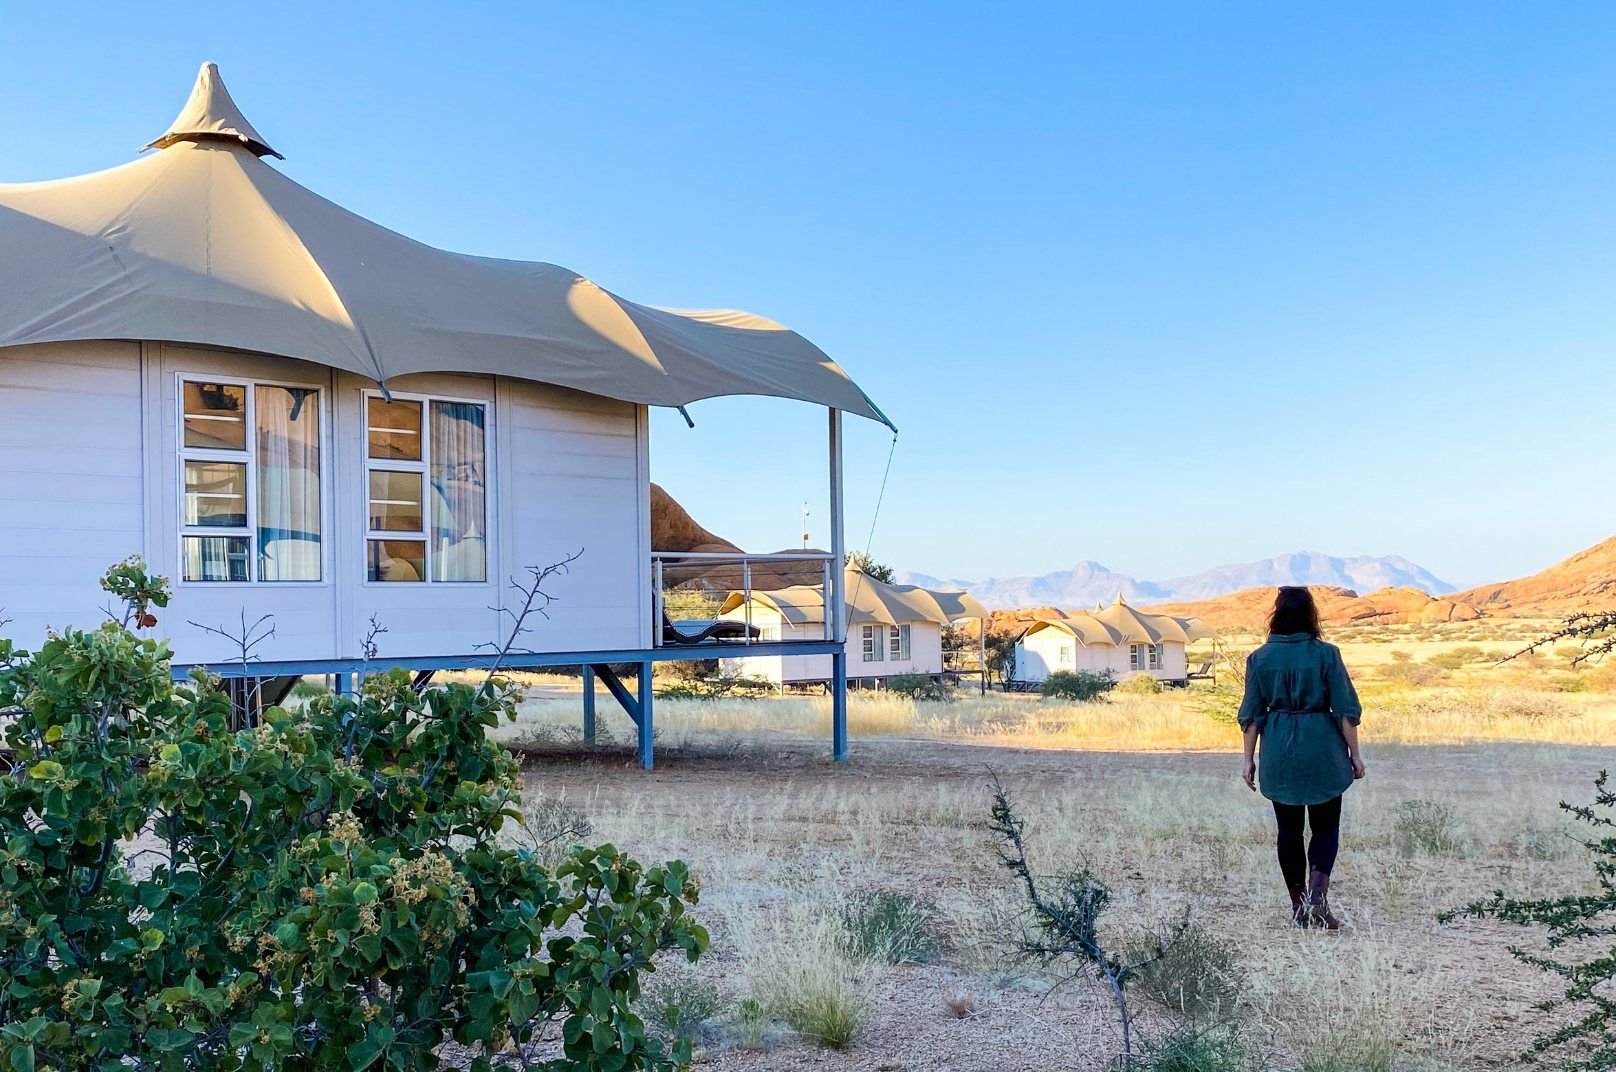 my stay at Spitzkoppen Lodge in Namibia